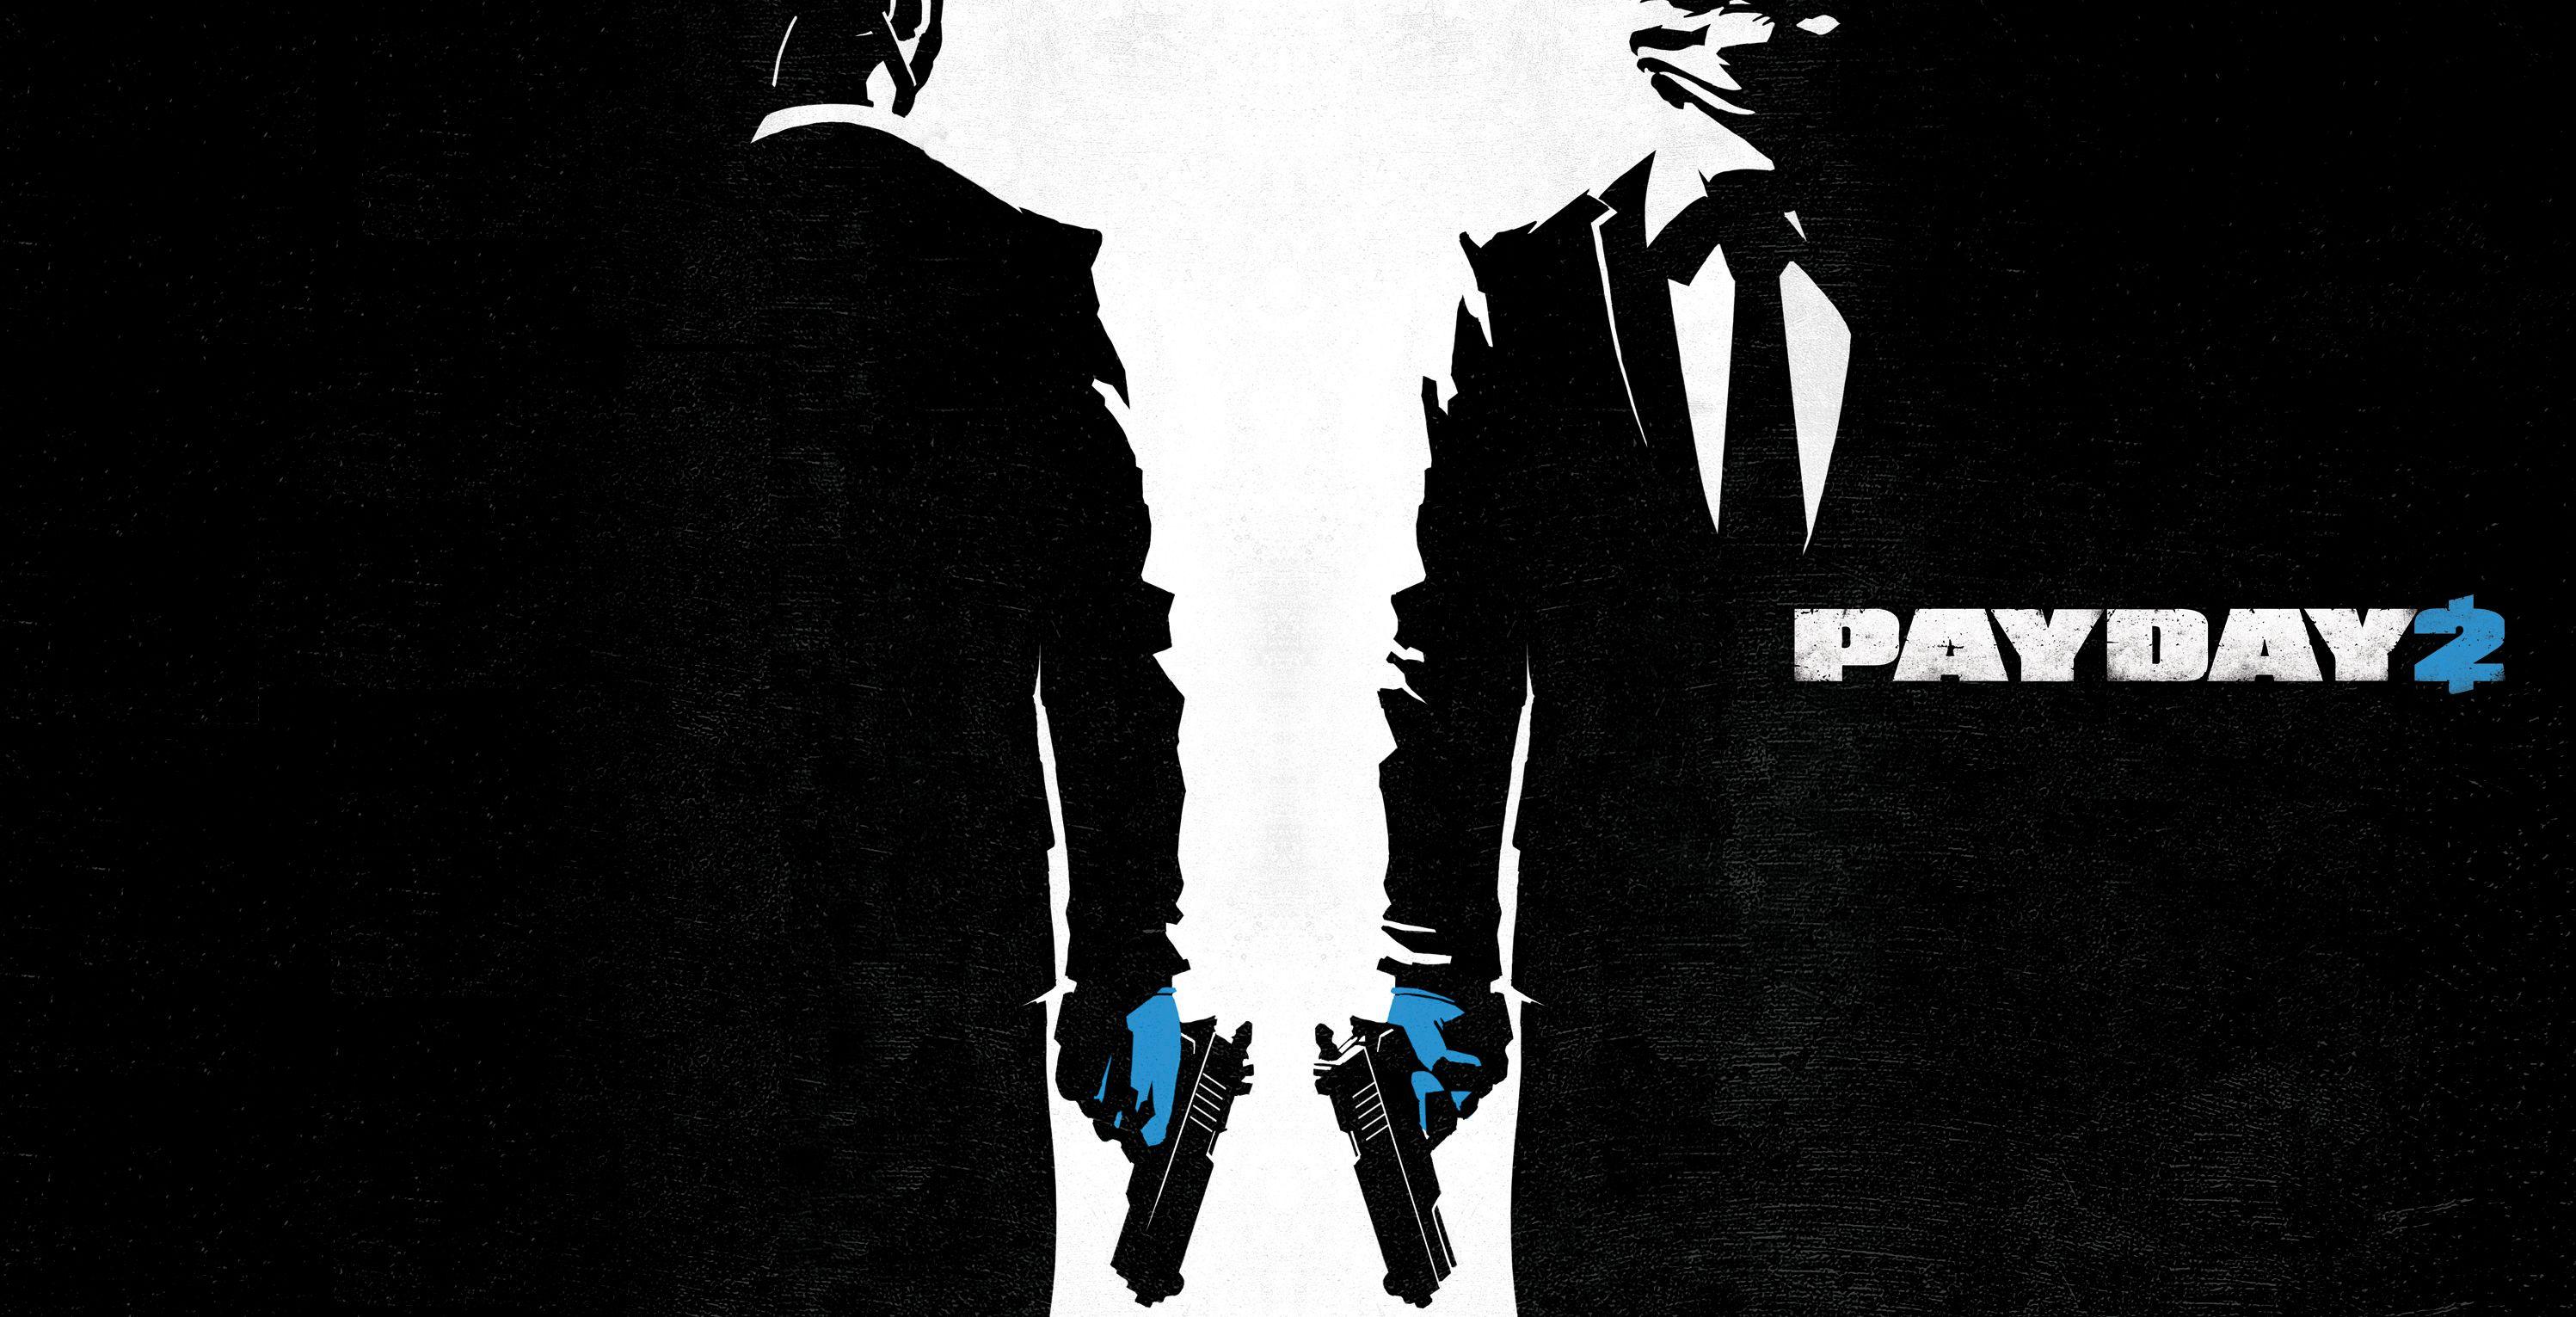 payday 2 download free